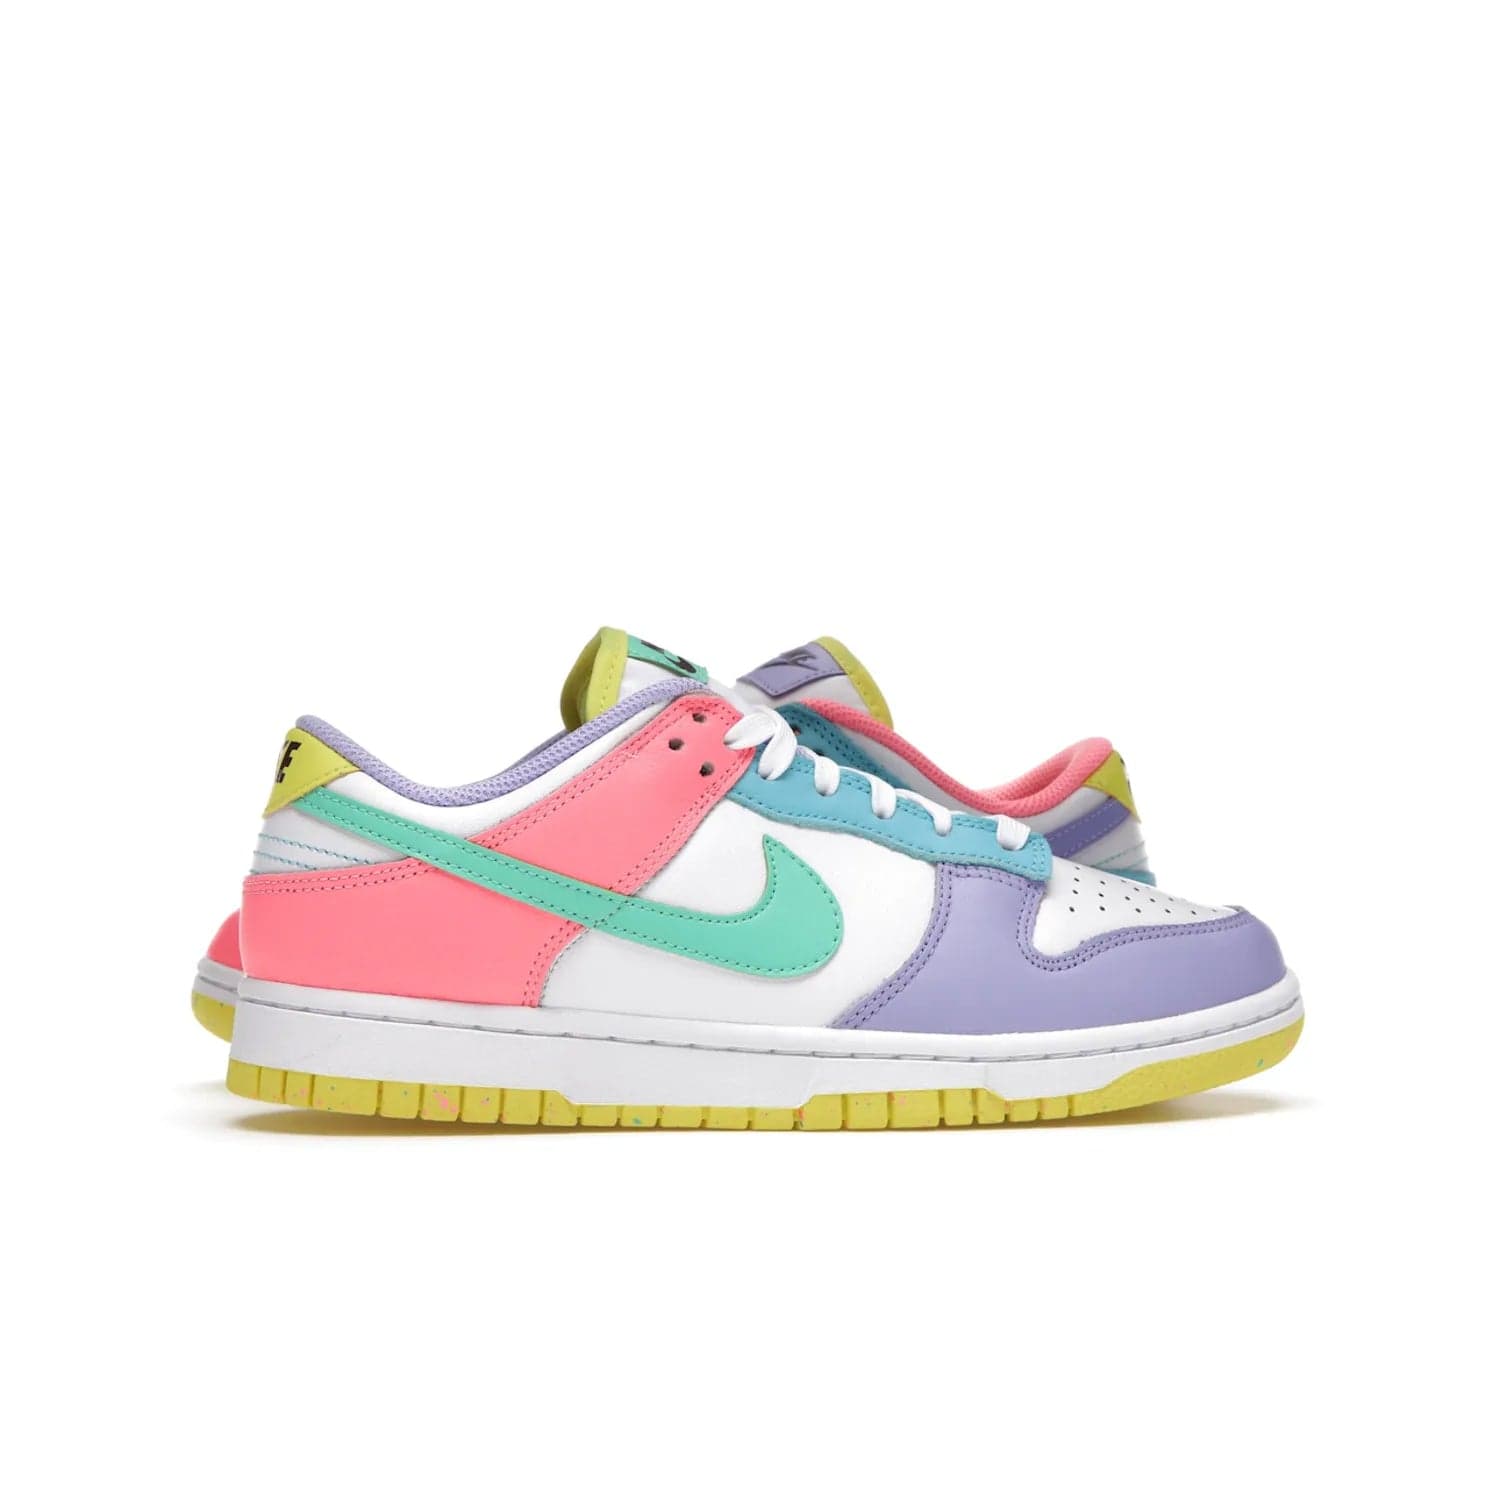 Nike Dunk Low SE Easter Candy (Women's) - Image 36 - Only at www.BallersClubKickz.com - UP
The Nike Dunk Low SE Easter Candy (Women's) brings a stylish touch to any outfit with its white leather upper, colorful accents, and multicolor speckle detailing. Shop now before they're gone.